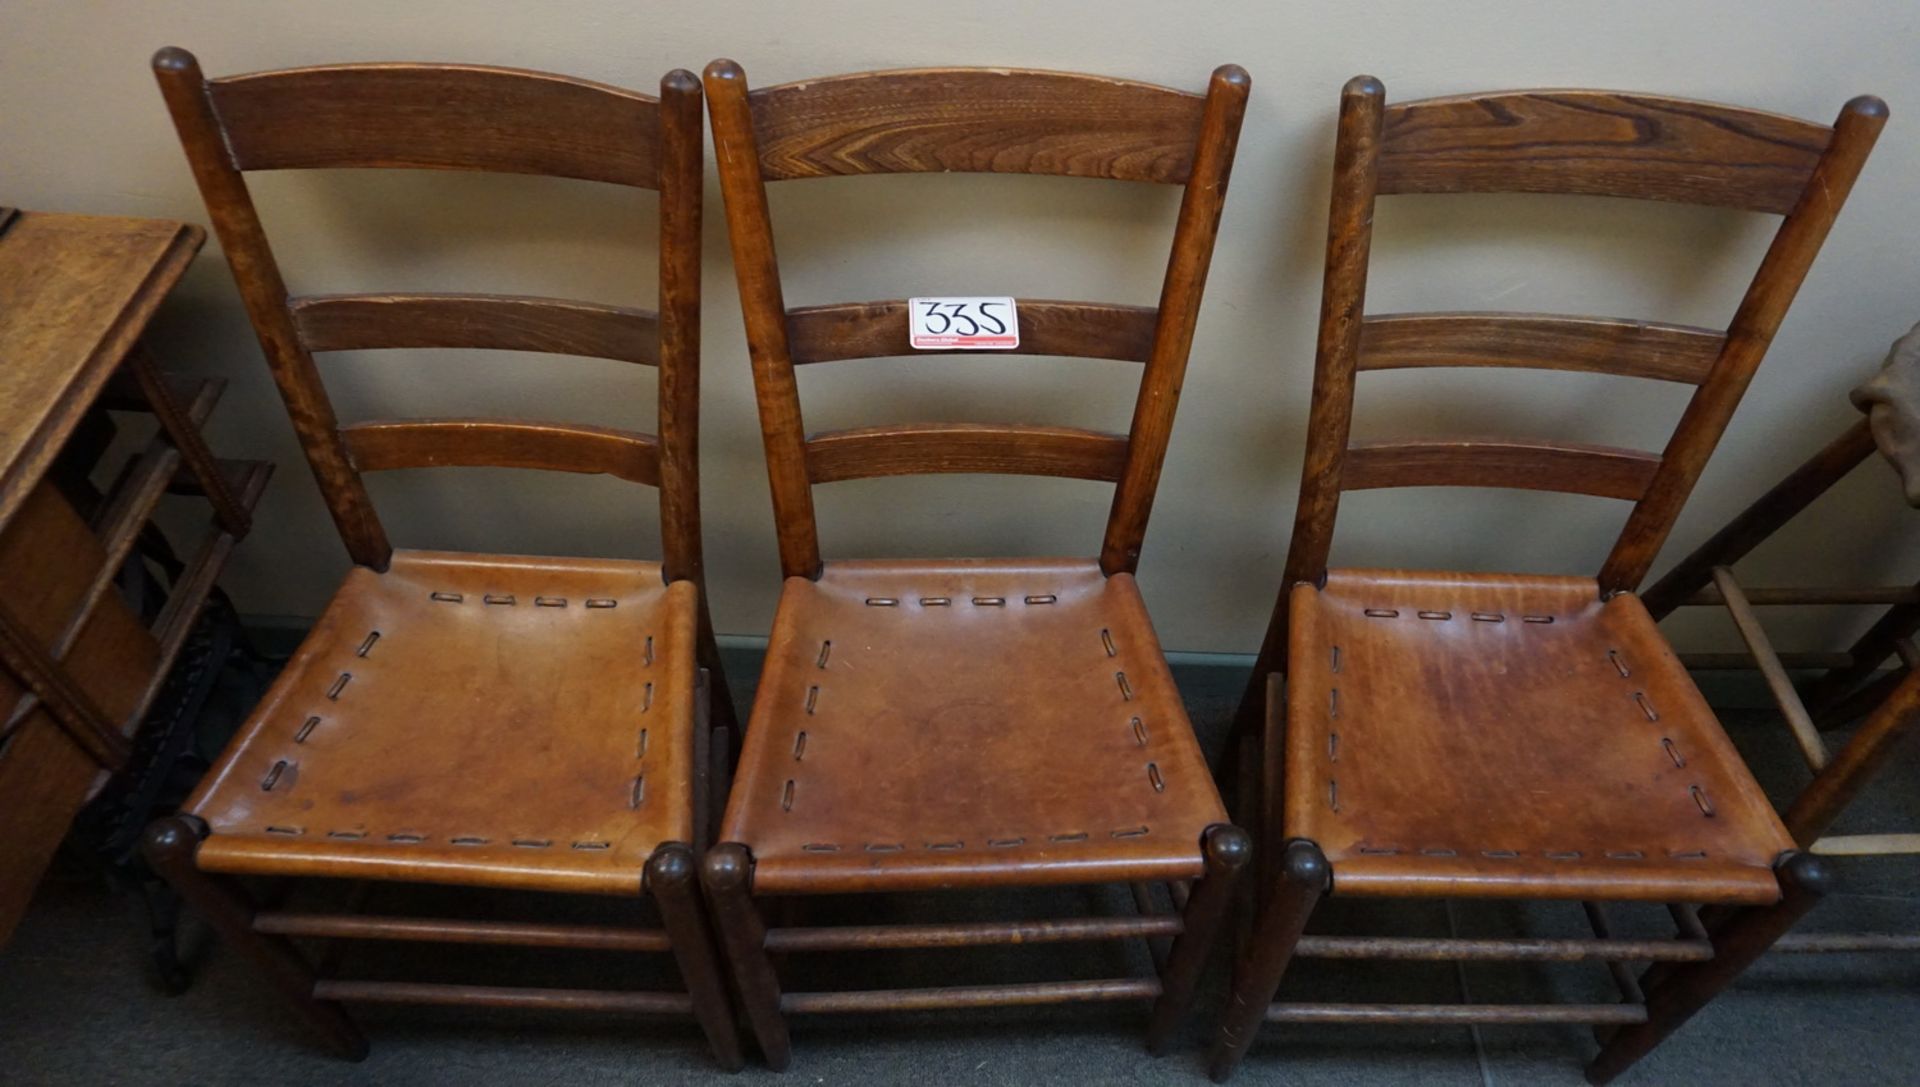 LOT - WOOD & LEATHER SIDE CHAIRS, MIRROR, & STOOLS